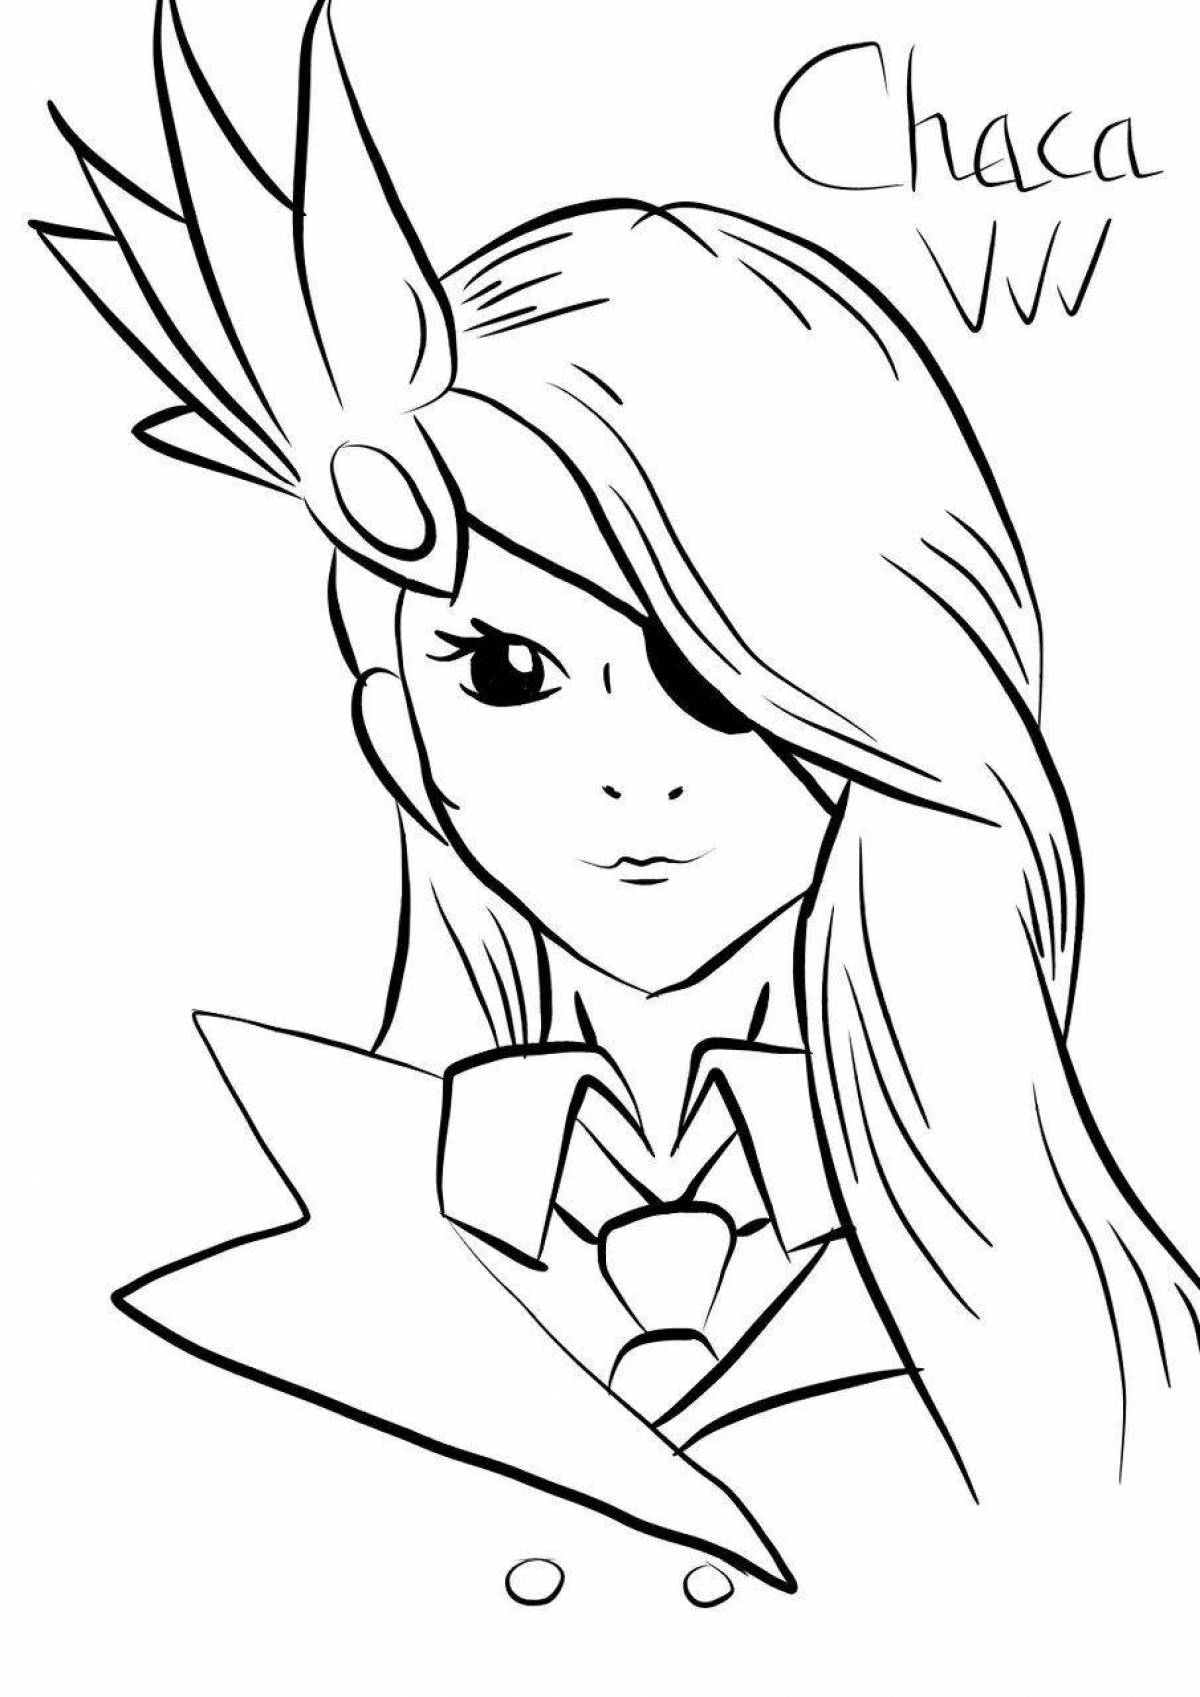 Mobile legends coloring page